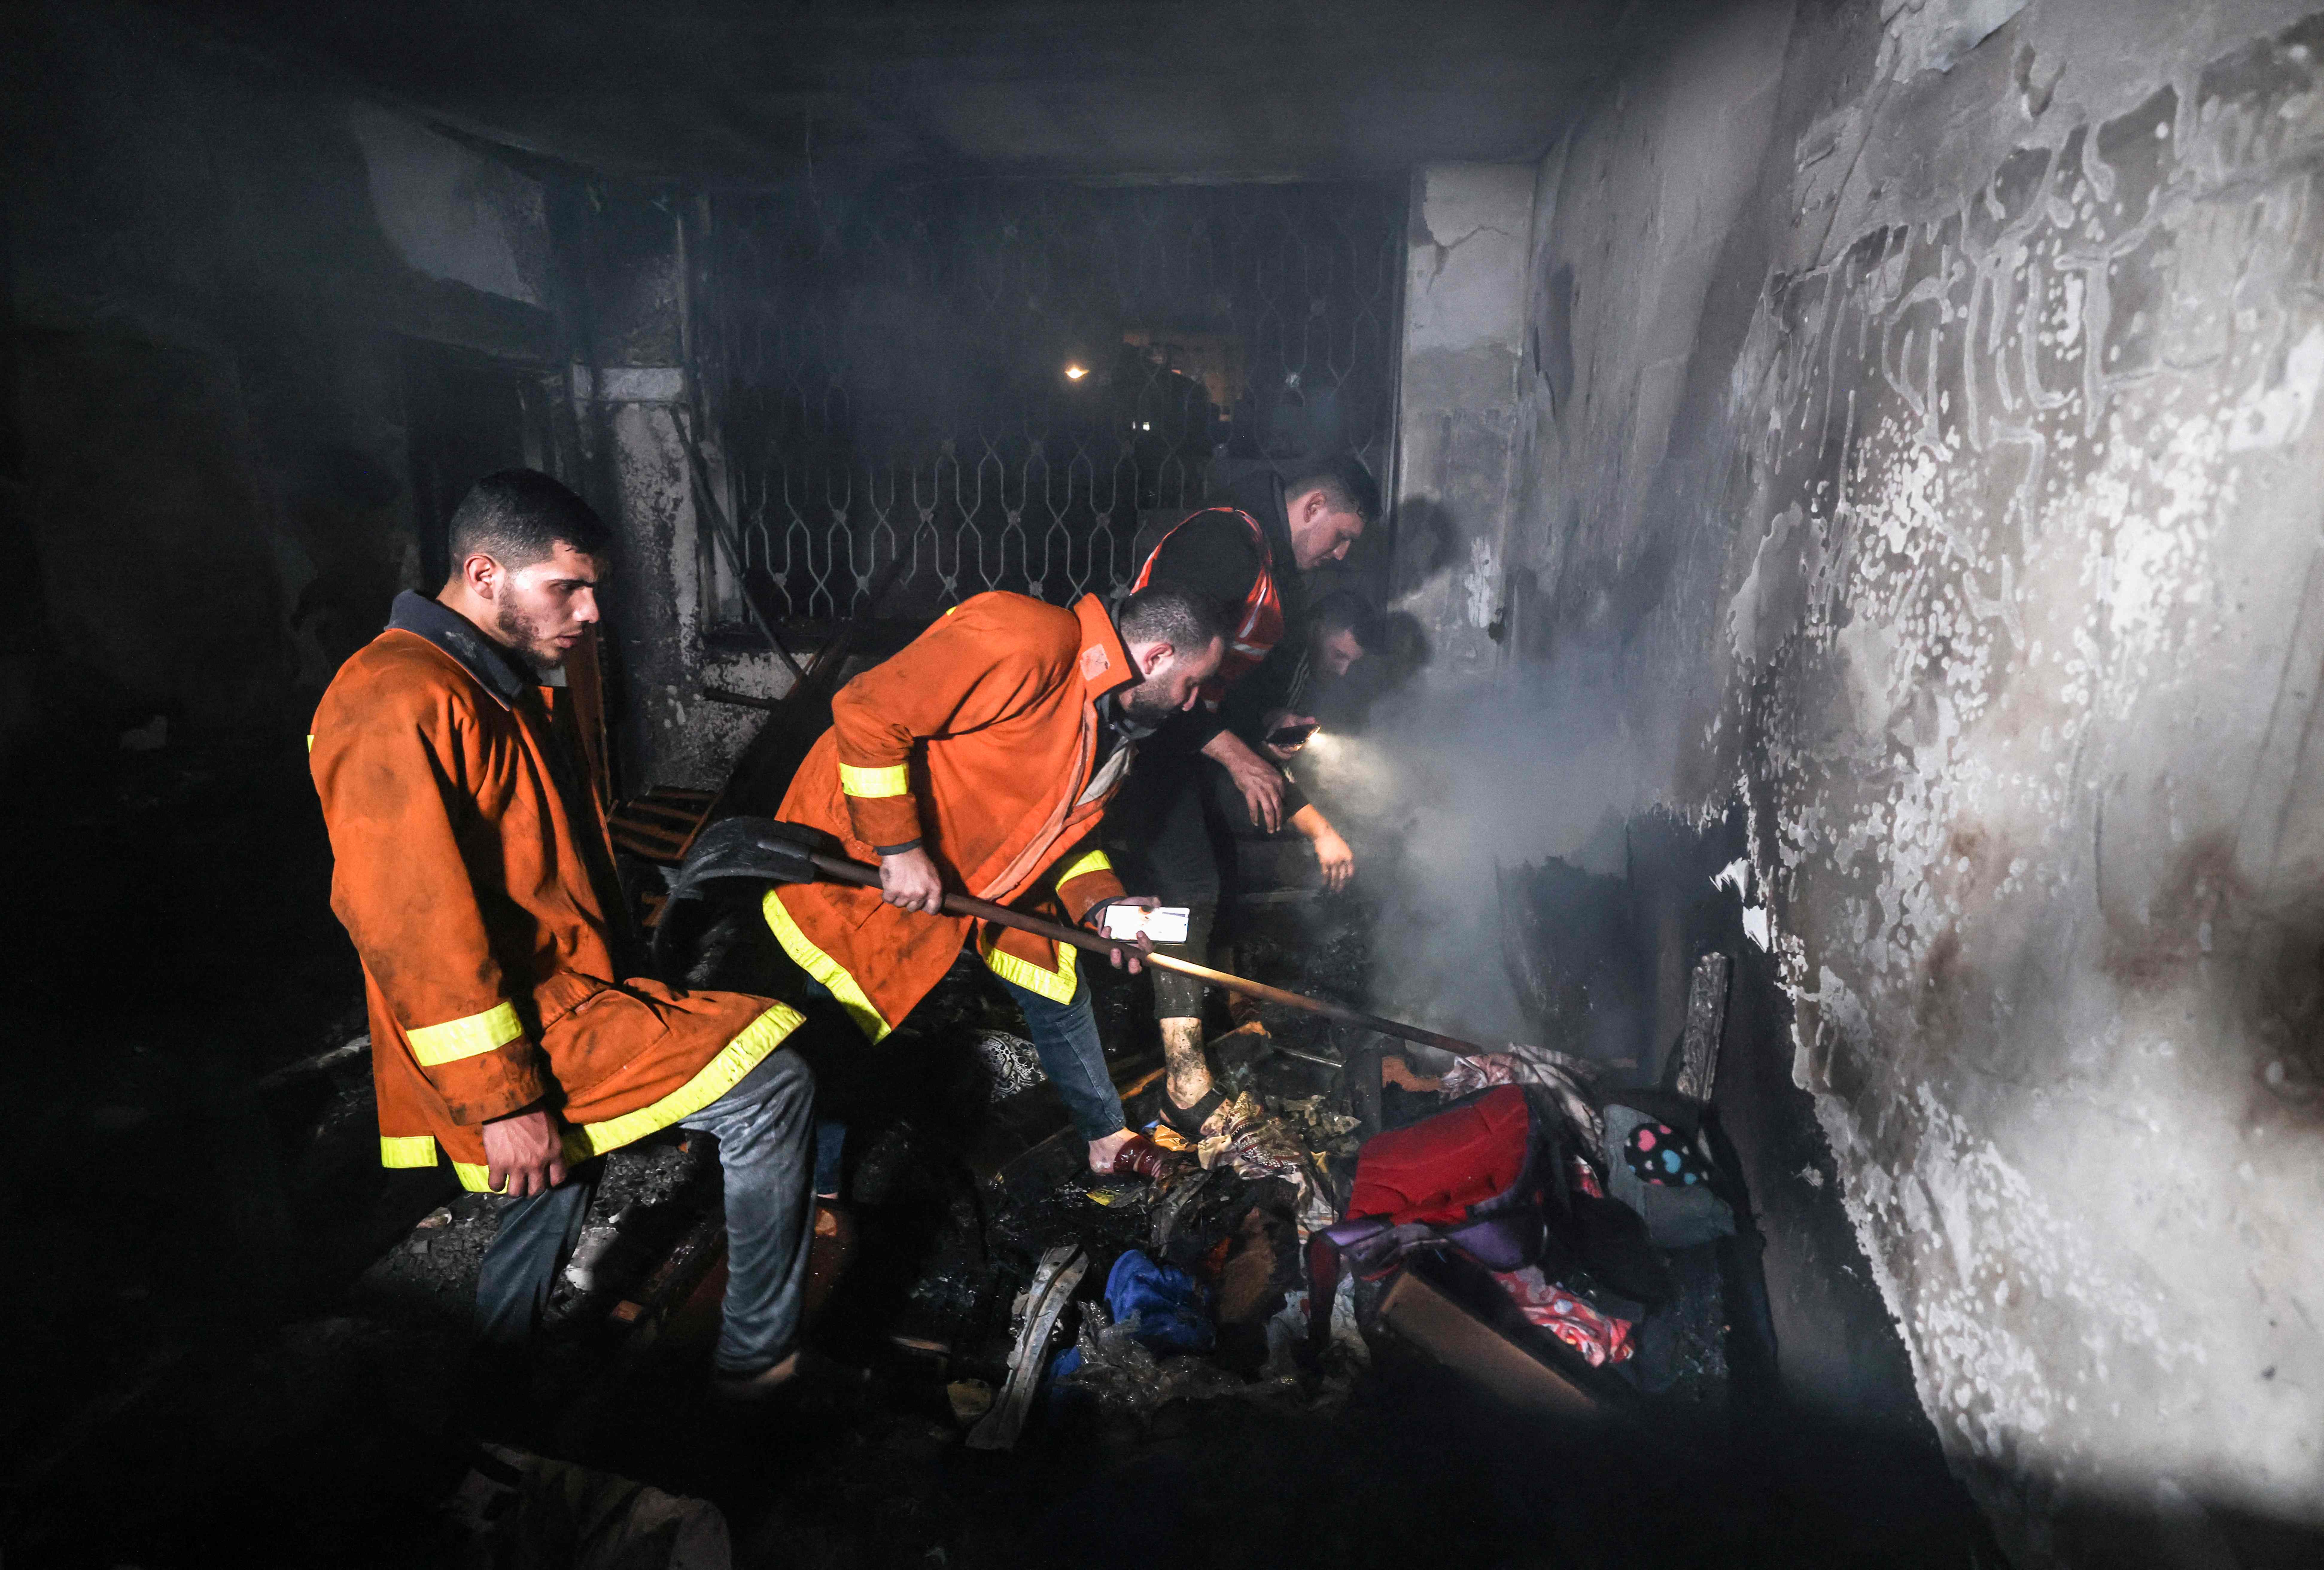 Palestinian firefighters extinguish a fire which broke out in one of the apartments in the Jabalia refugee camp in the northern Gaza strip